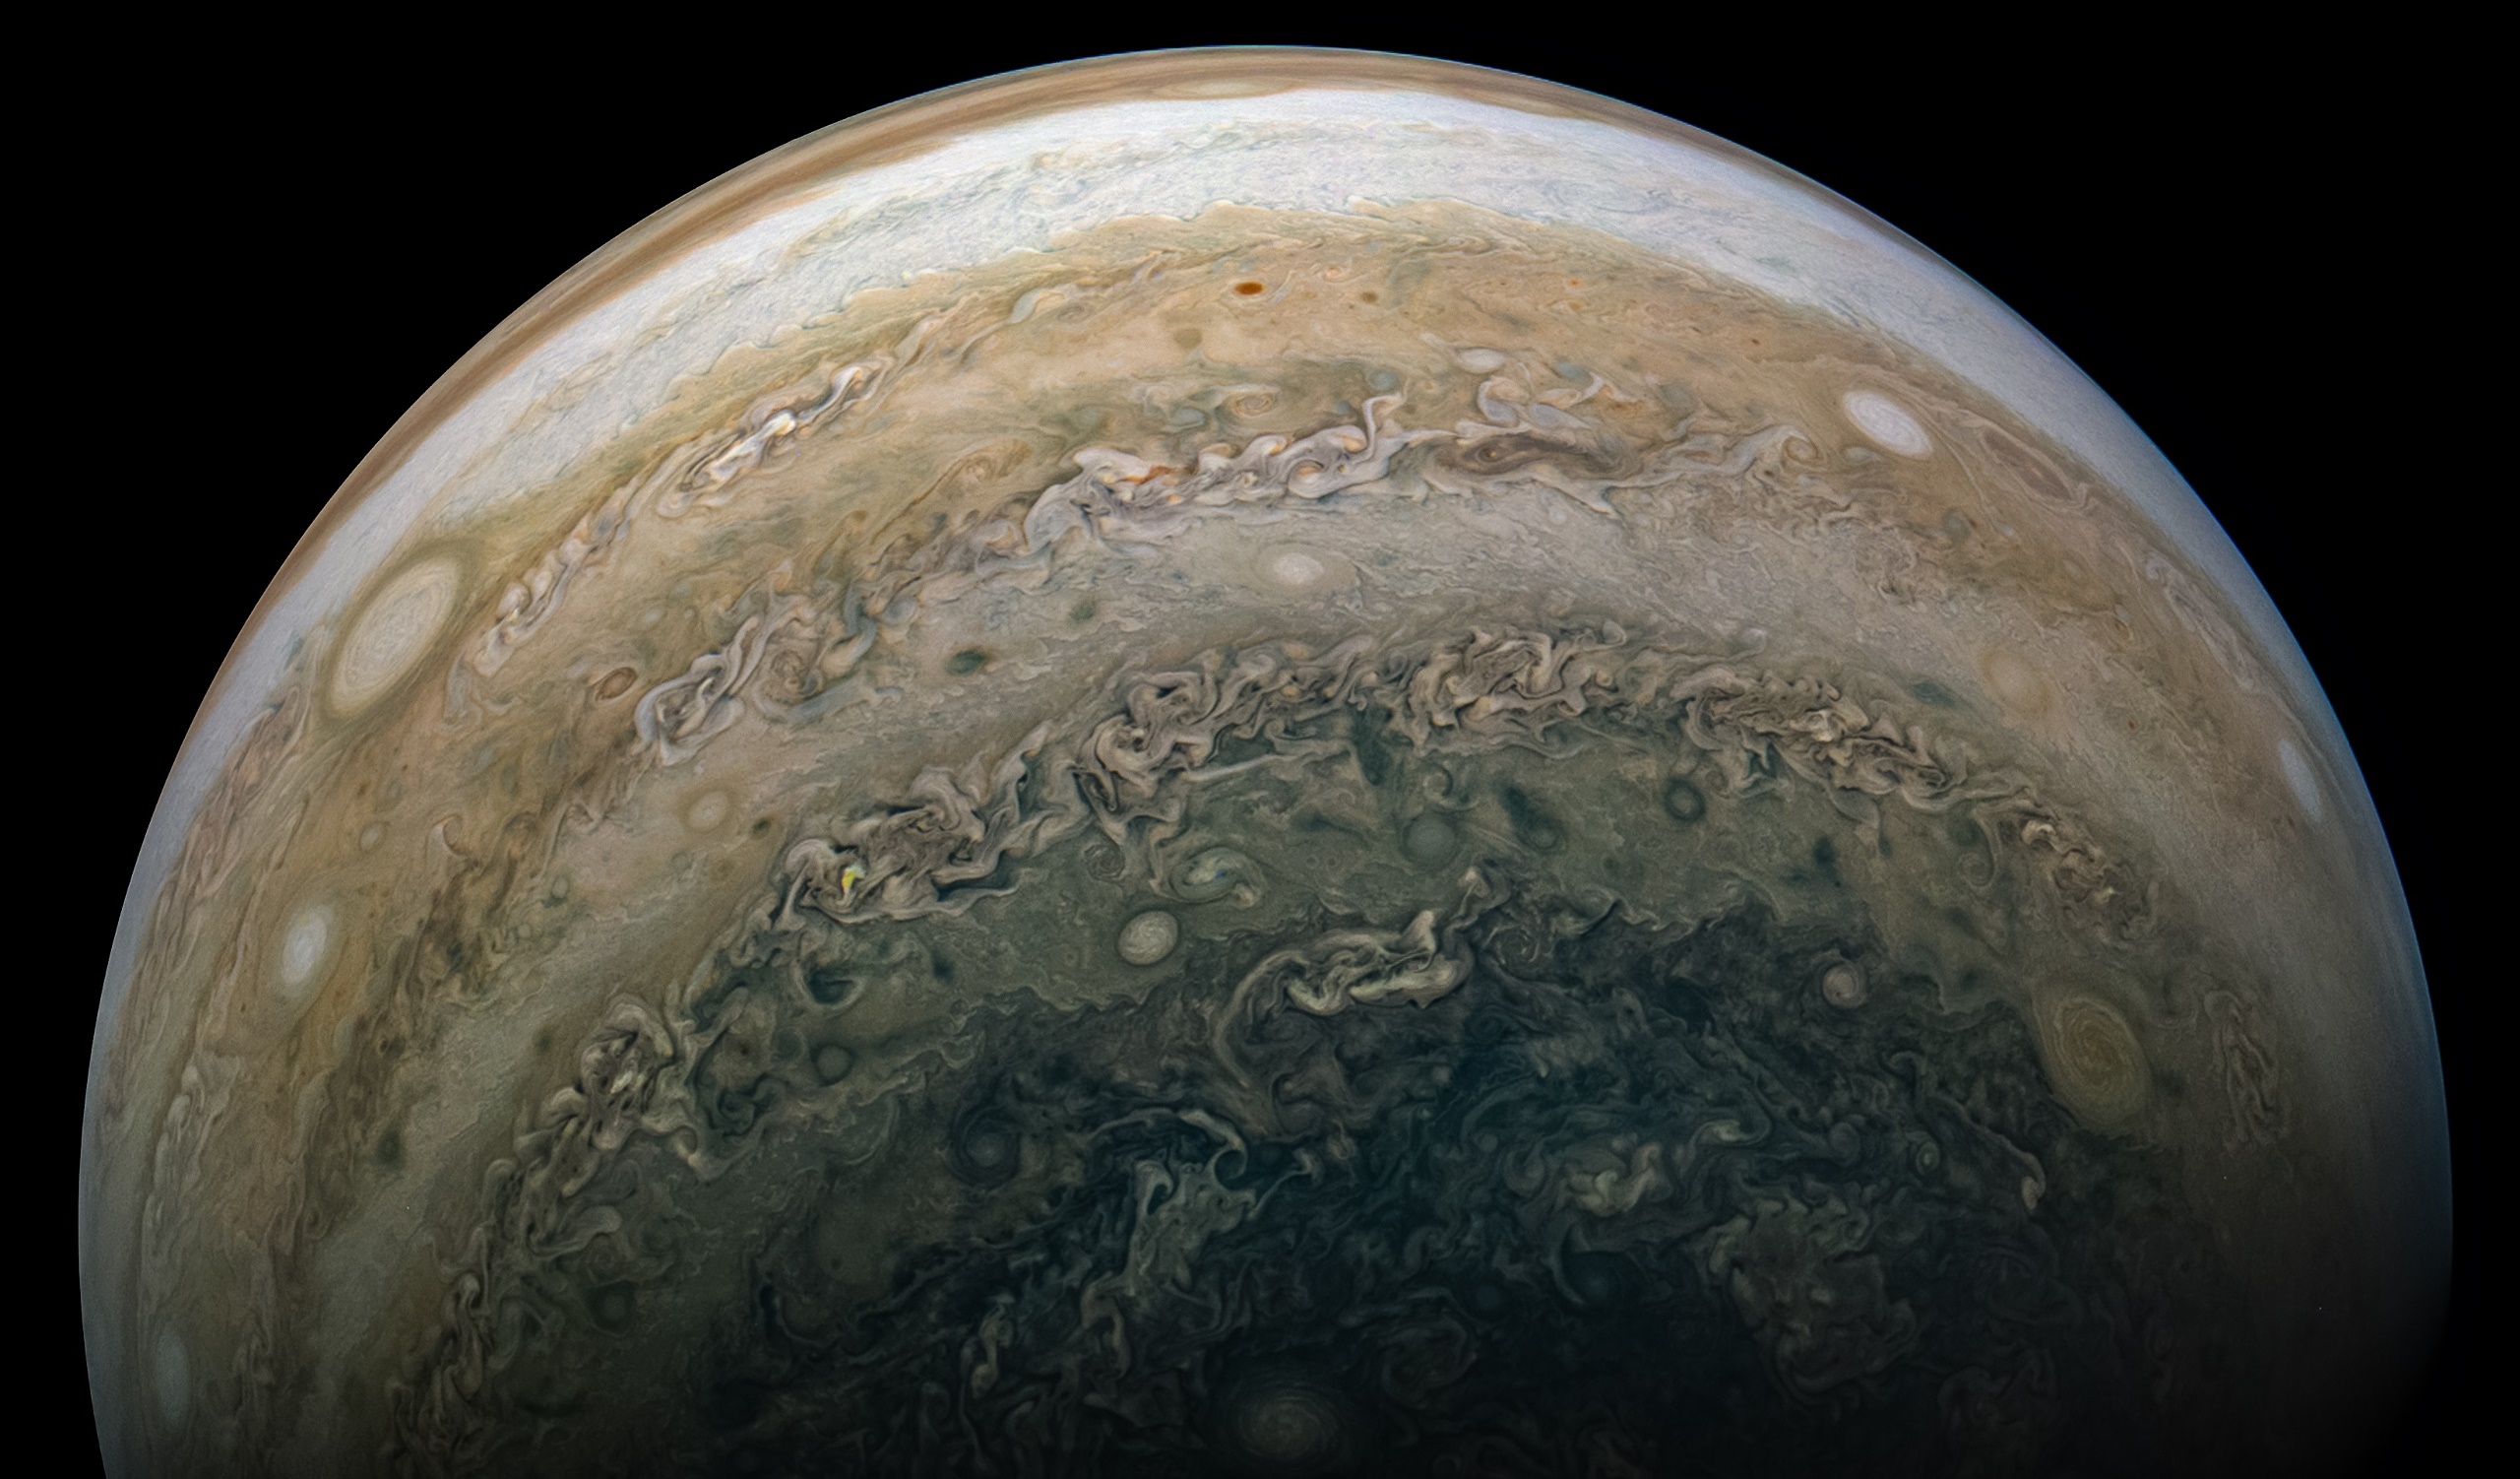 General 2560x1502 space planet Jupiter photography